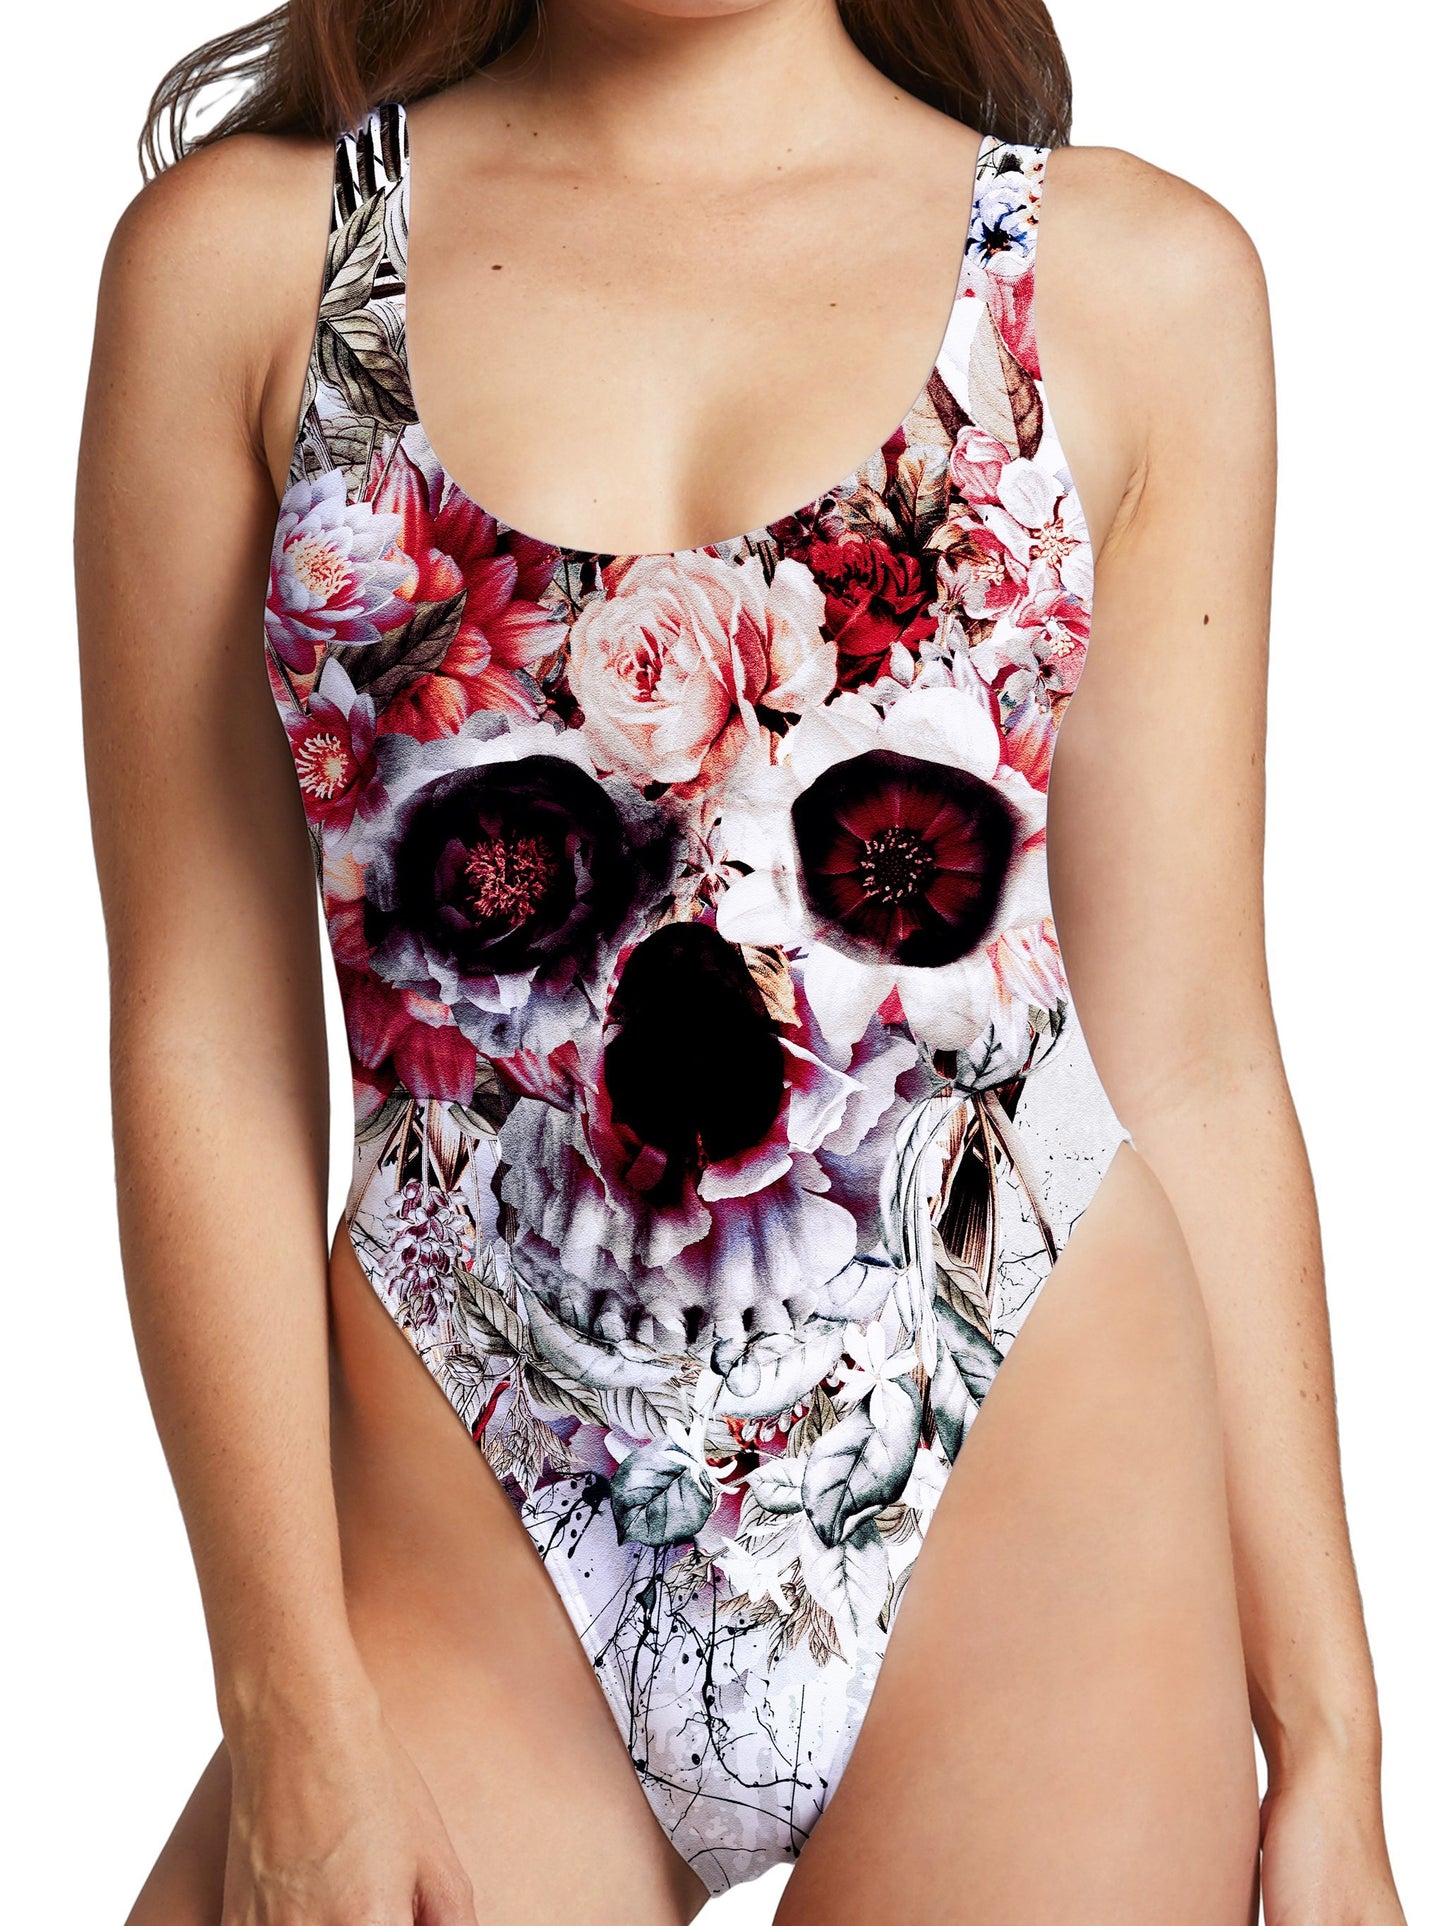 Floral Skull High Cut One-Piece Swimsuit, Riza Peker, | iEDM